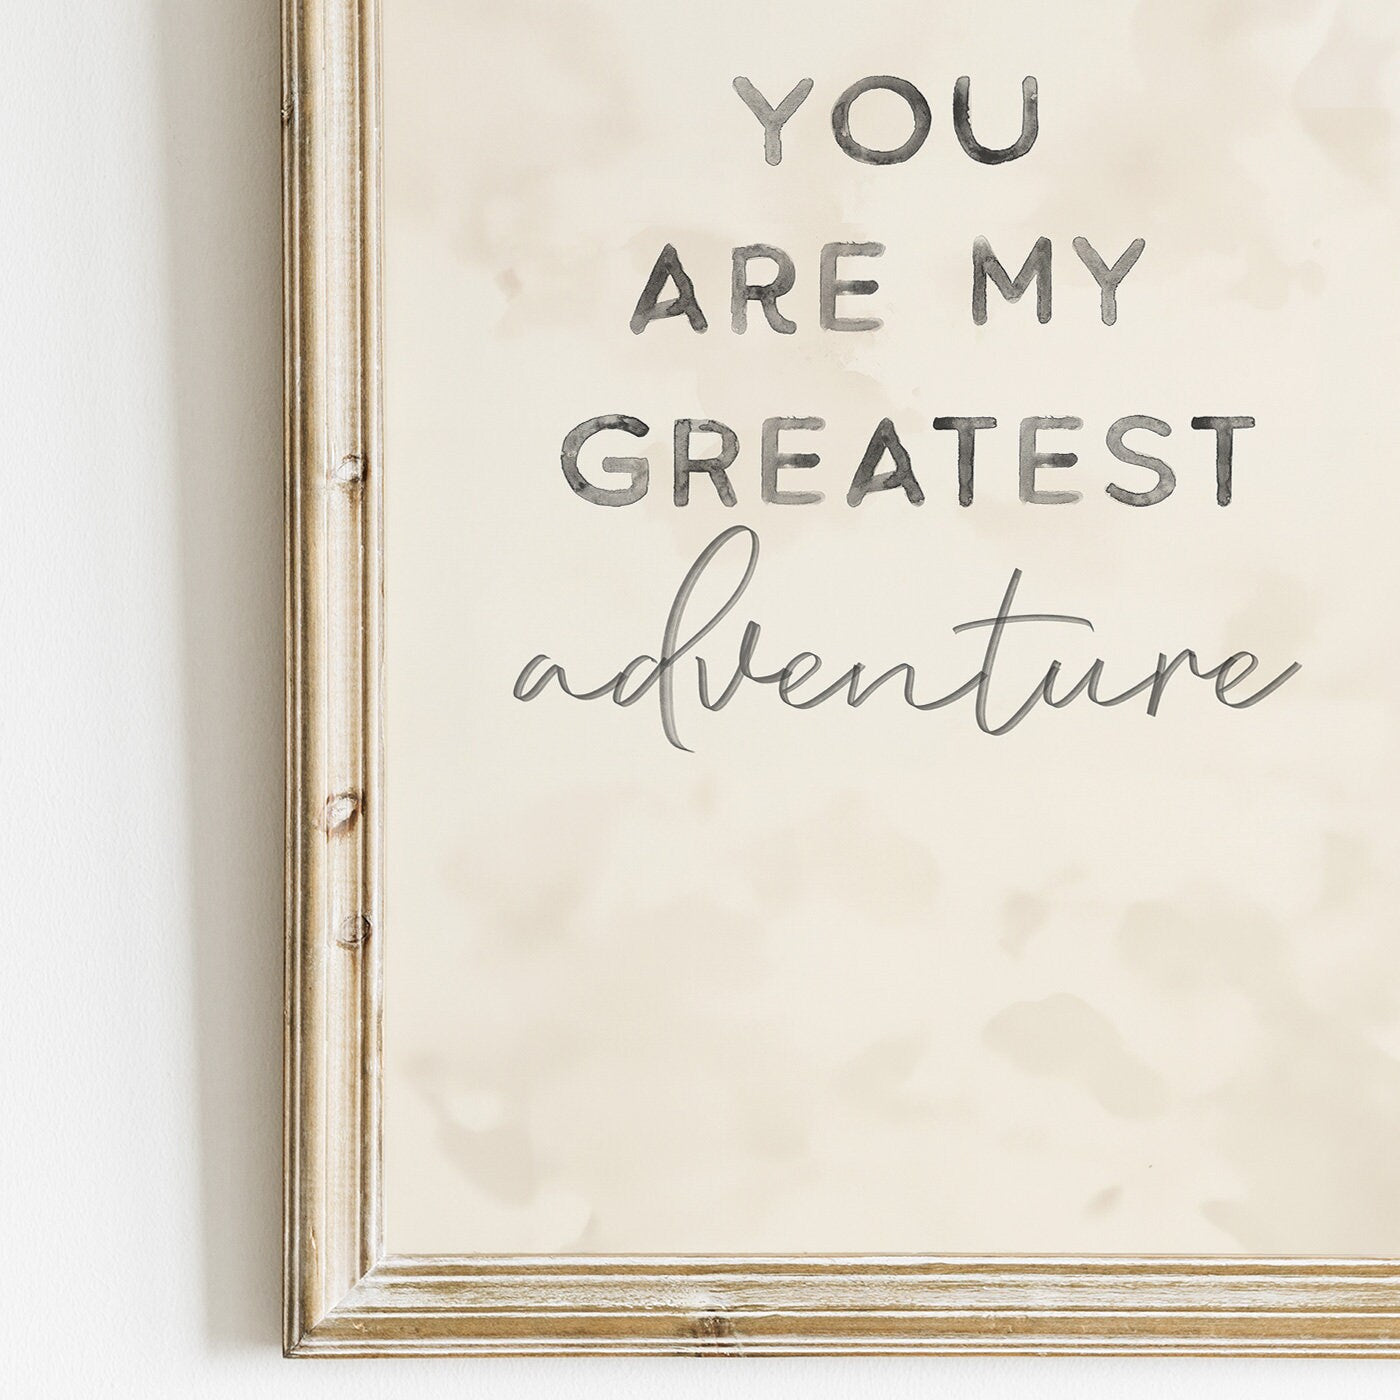 Inspirational Boy Adventure Quote Art - 'You Are My Greatest Adventure', Mountain View, Set of 2, Nursery Decor, Printable Wall Art